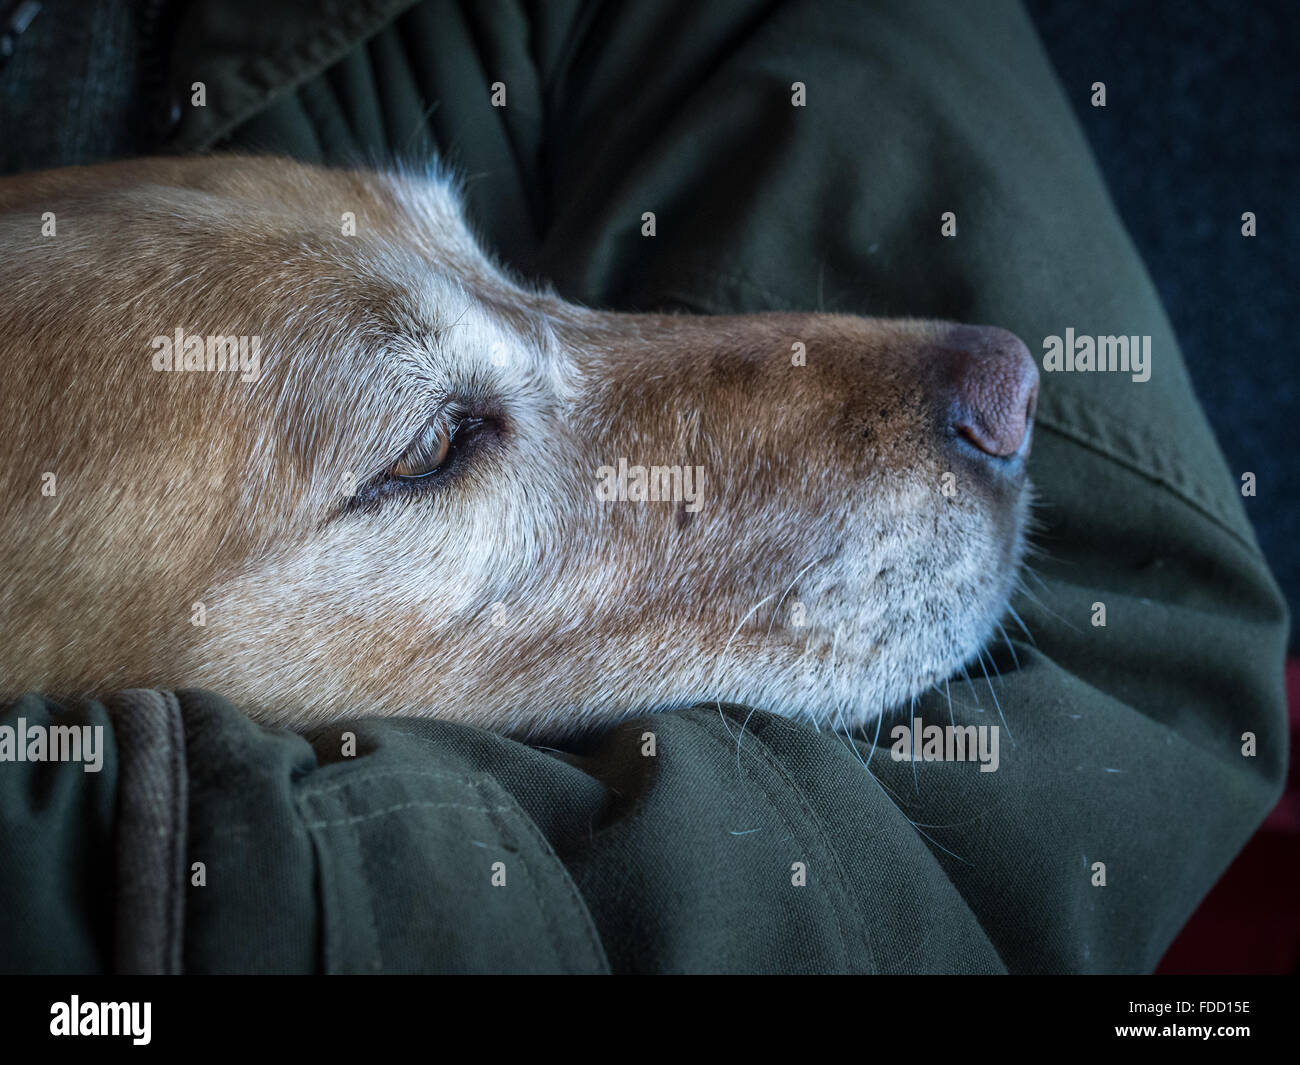 a golden labrador retriever dog resting its head in owner man's arm elbow with shooting jacket Stock Photo